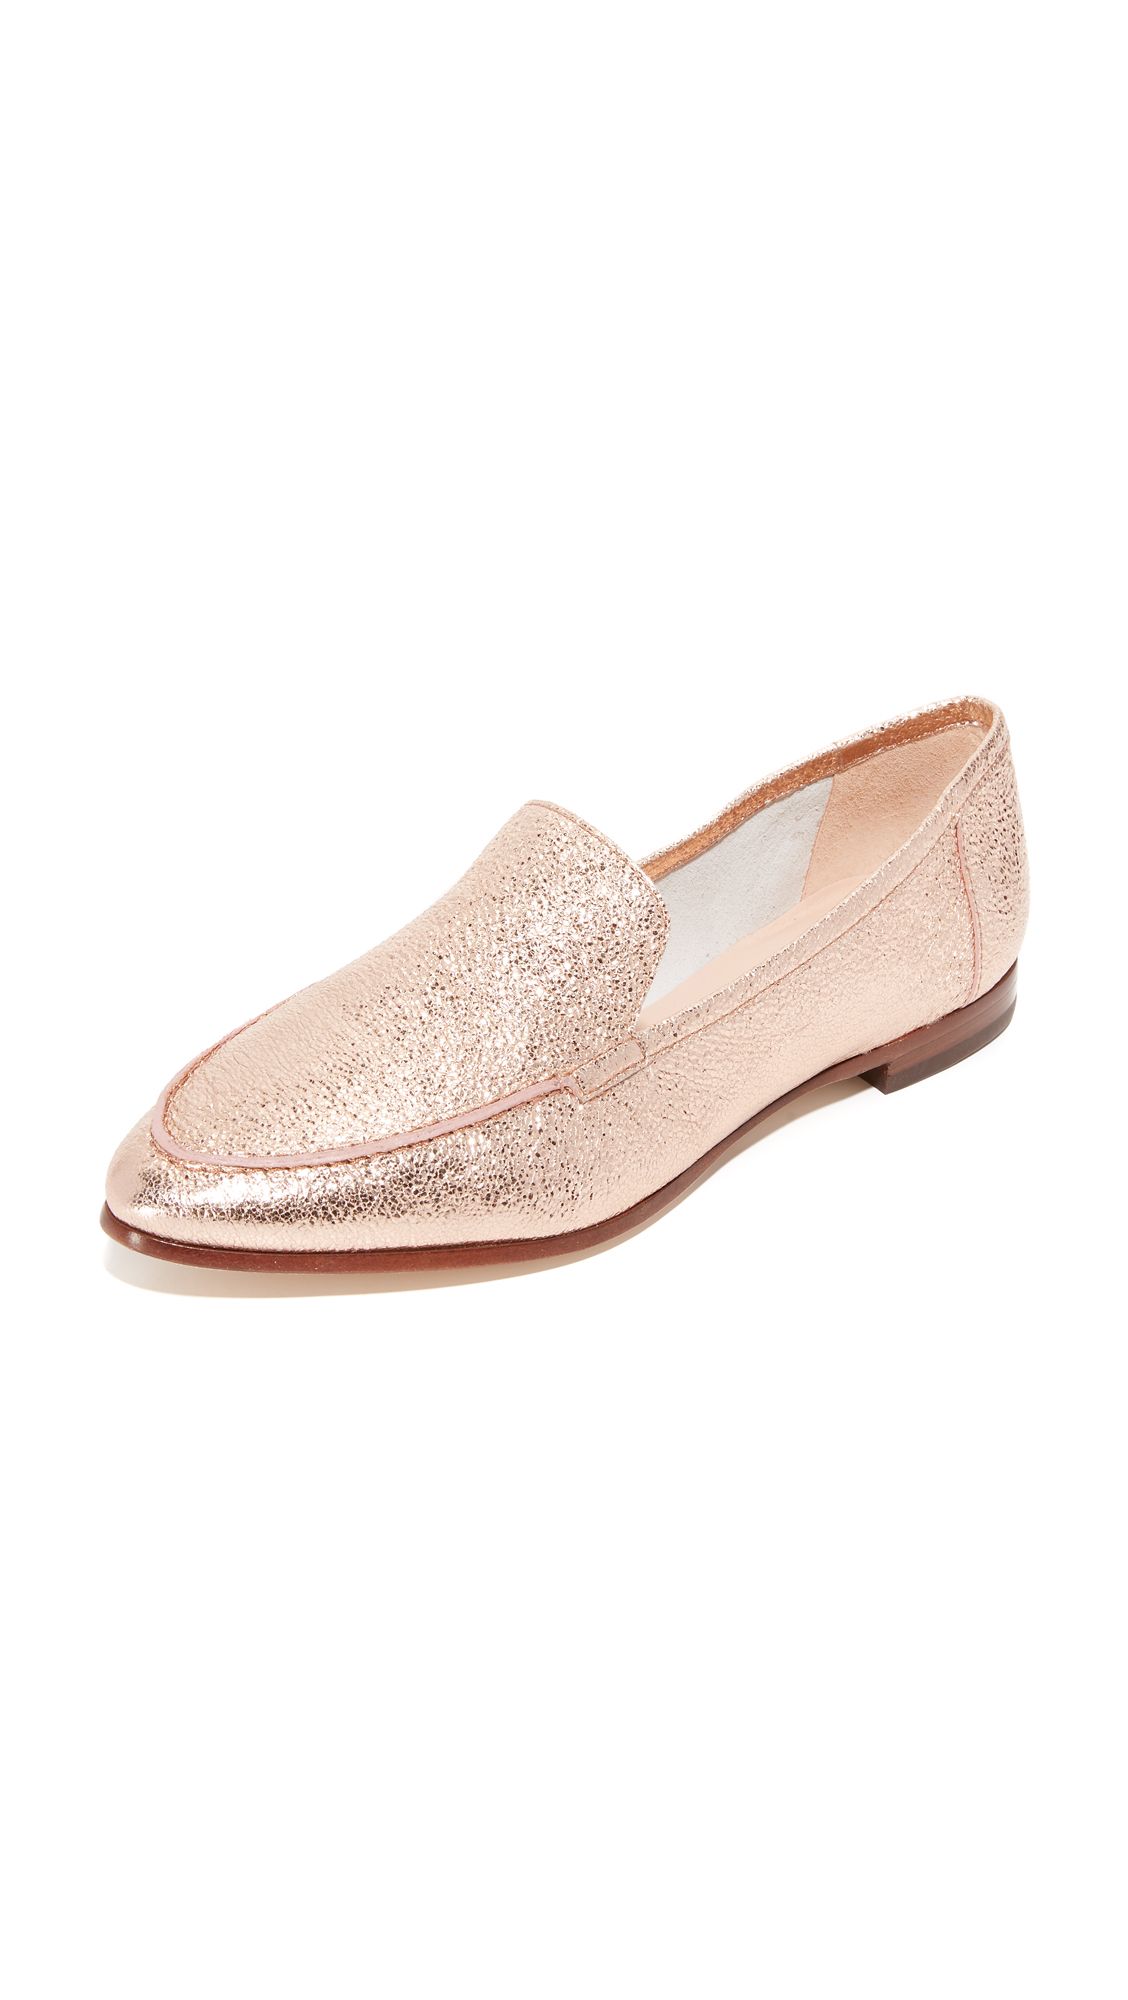 Kate Spade New York Carima Loafers - Rose Gold | Shopbop